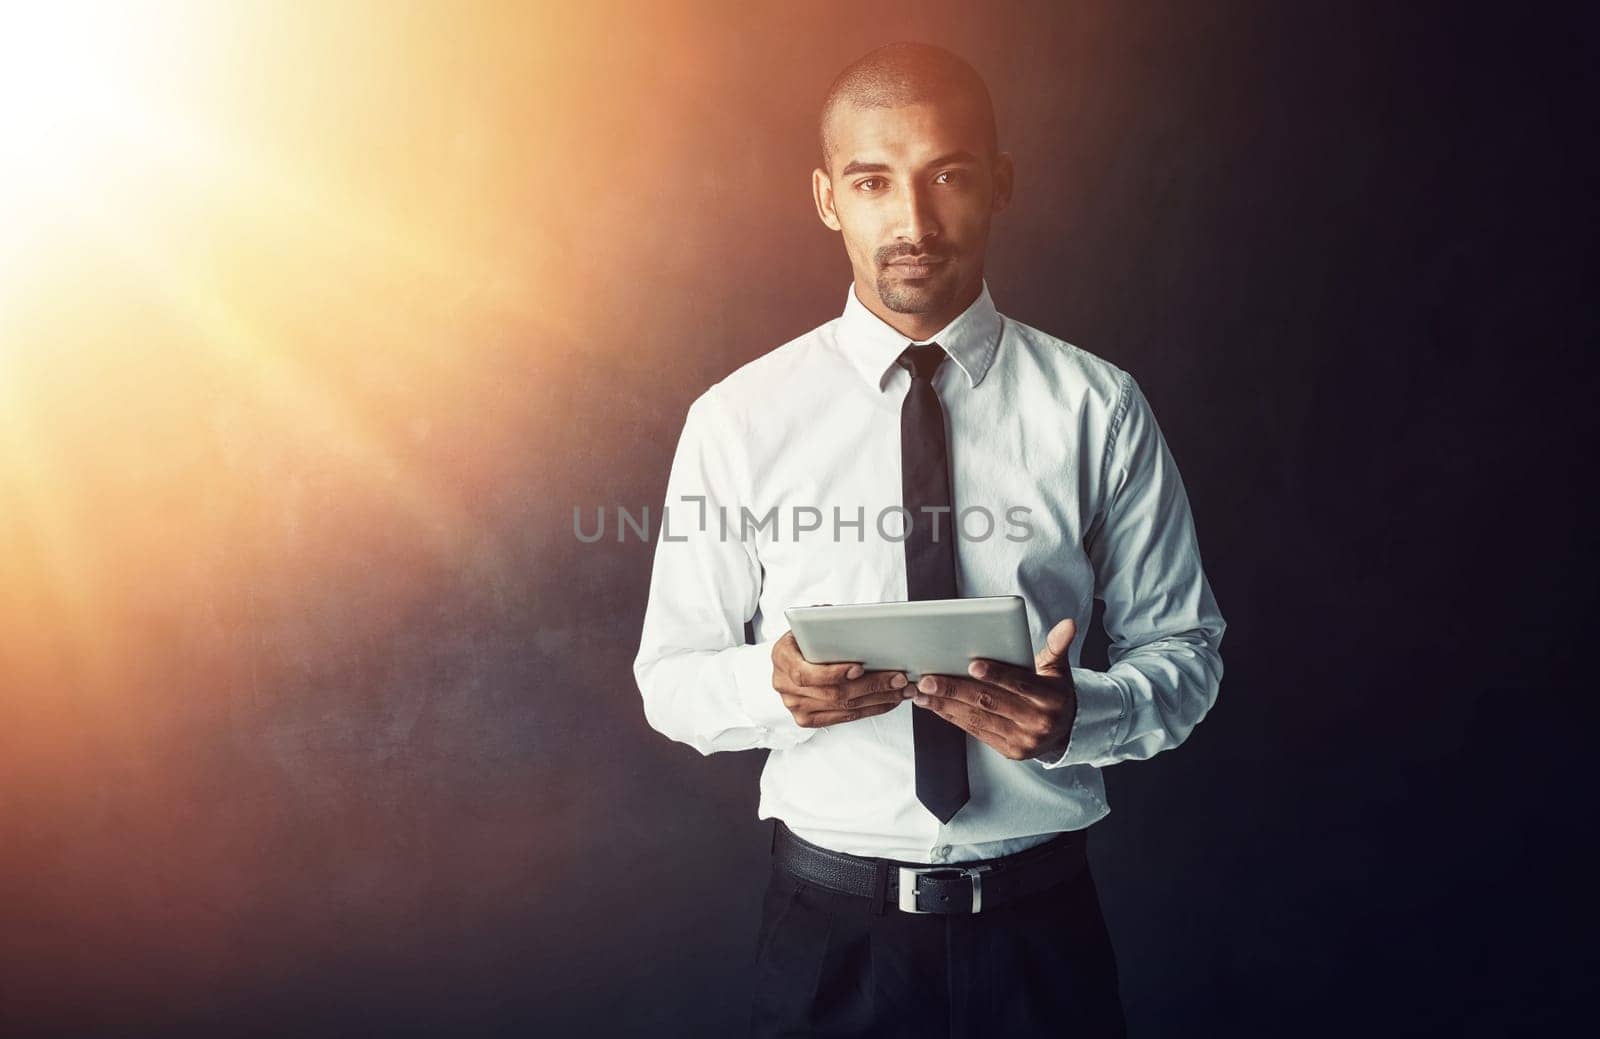 Modern business demands staying connected. Studio portrait of a young businessman using a digital tablet against a dark background. by YuriArcurs